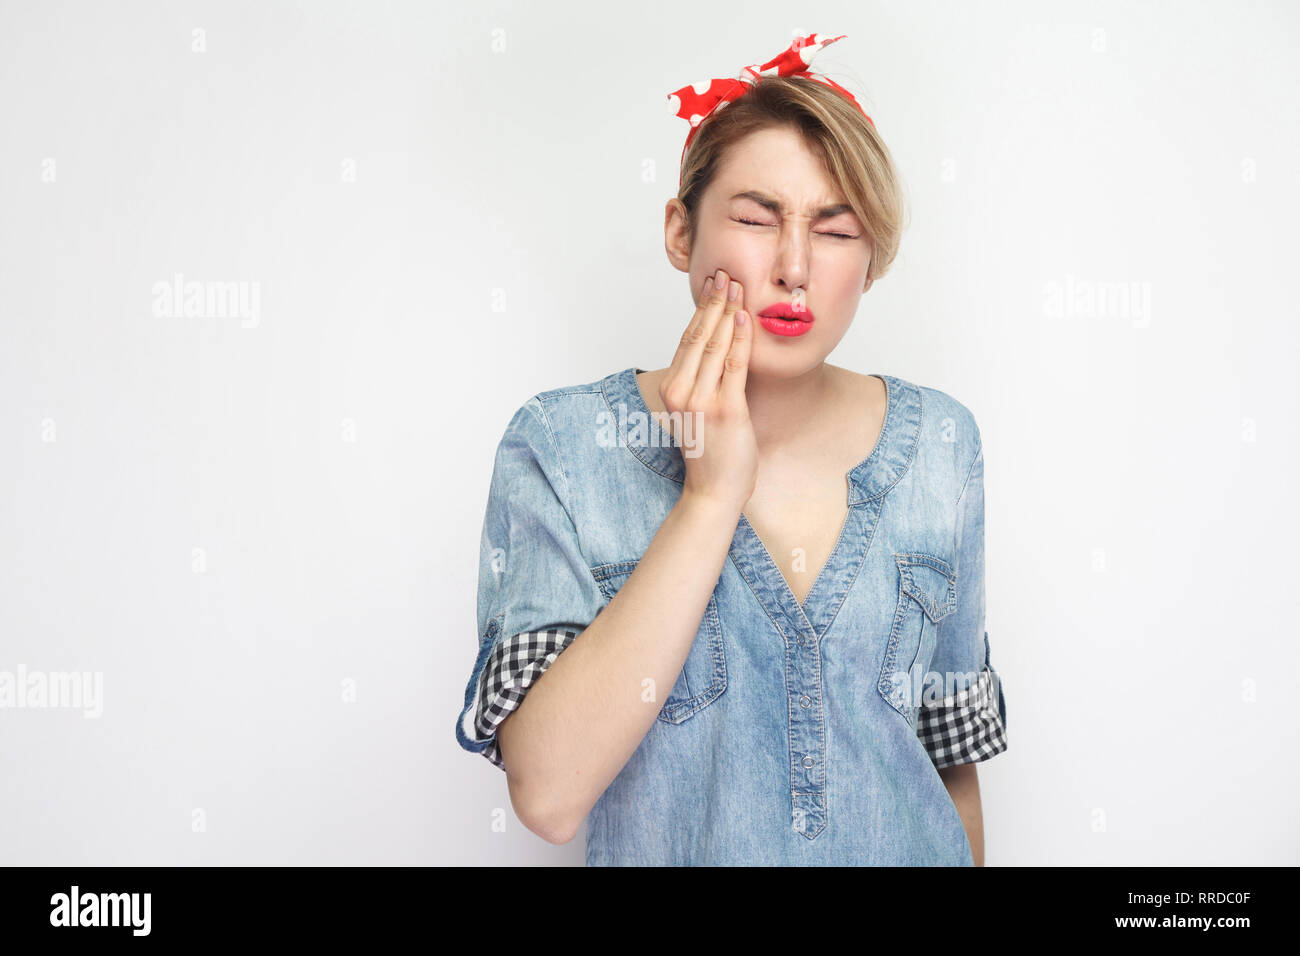 Tooth ache or pain. Portrait of young woman in casual blue denim shirt with makeup and red headband standing and feeling pain on her tooth. indoor stu Stock Photo